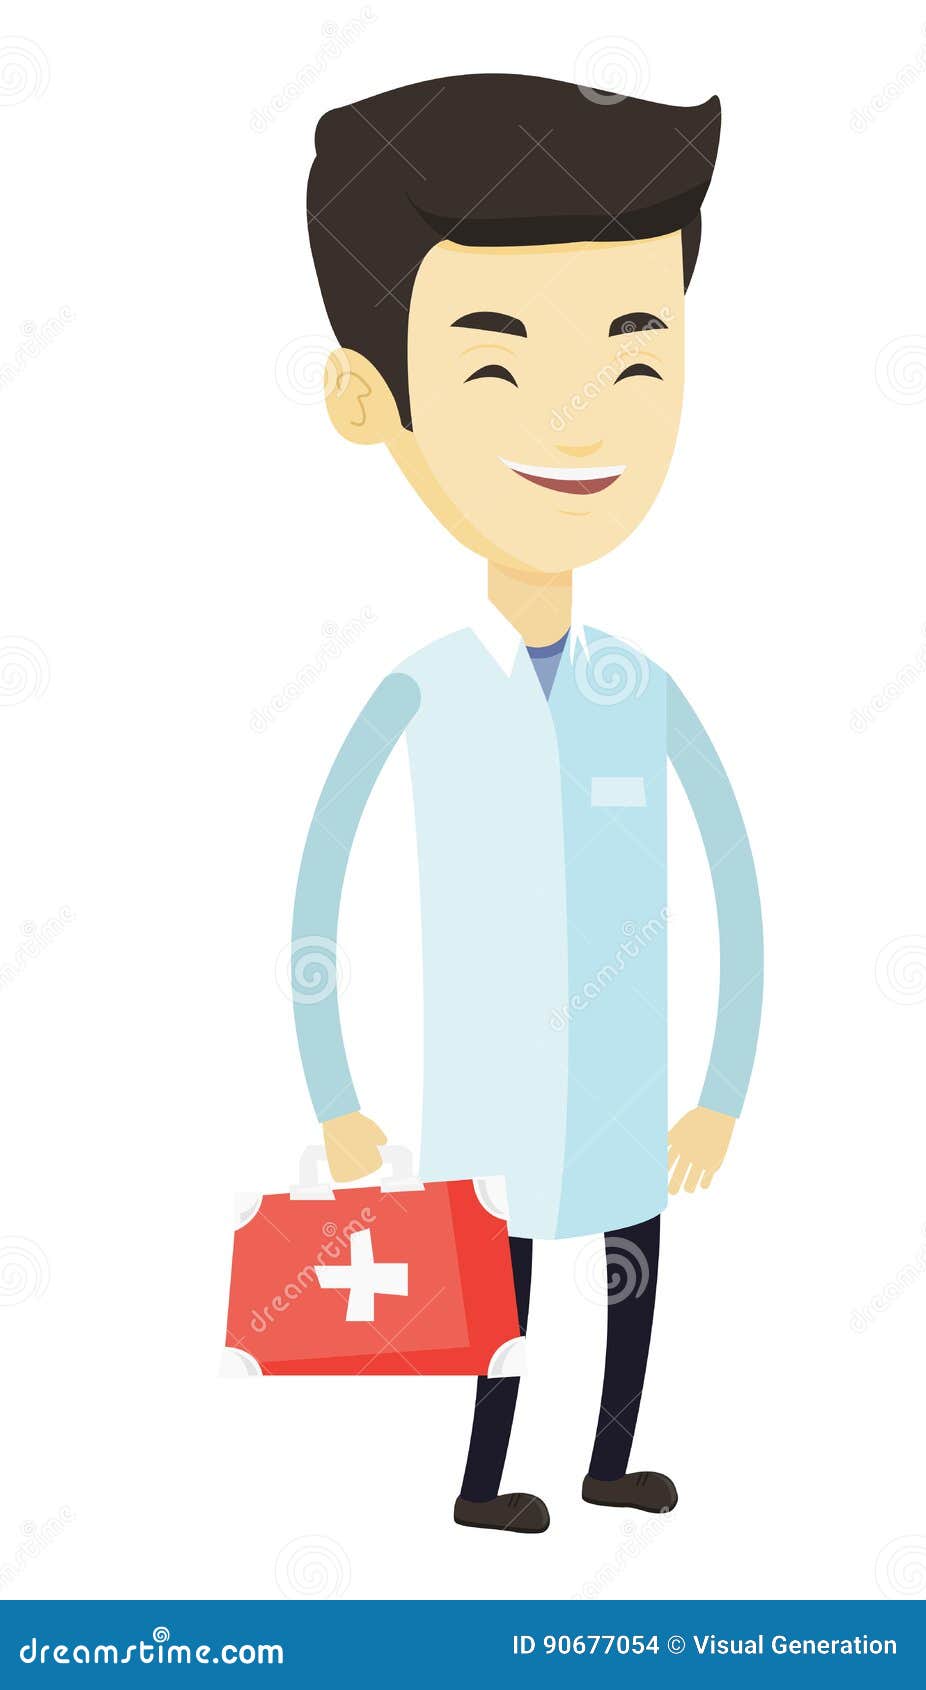 Doctor Holding First Aid Box Vector Illustration. Stock Vector ...